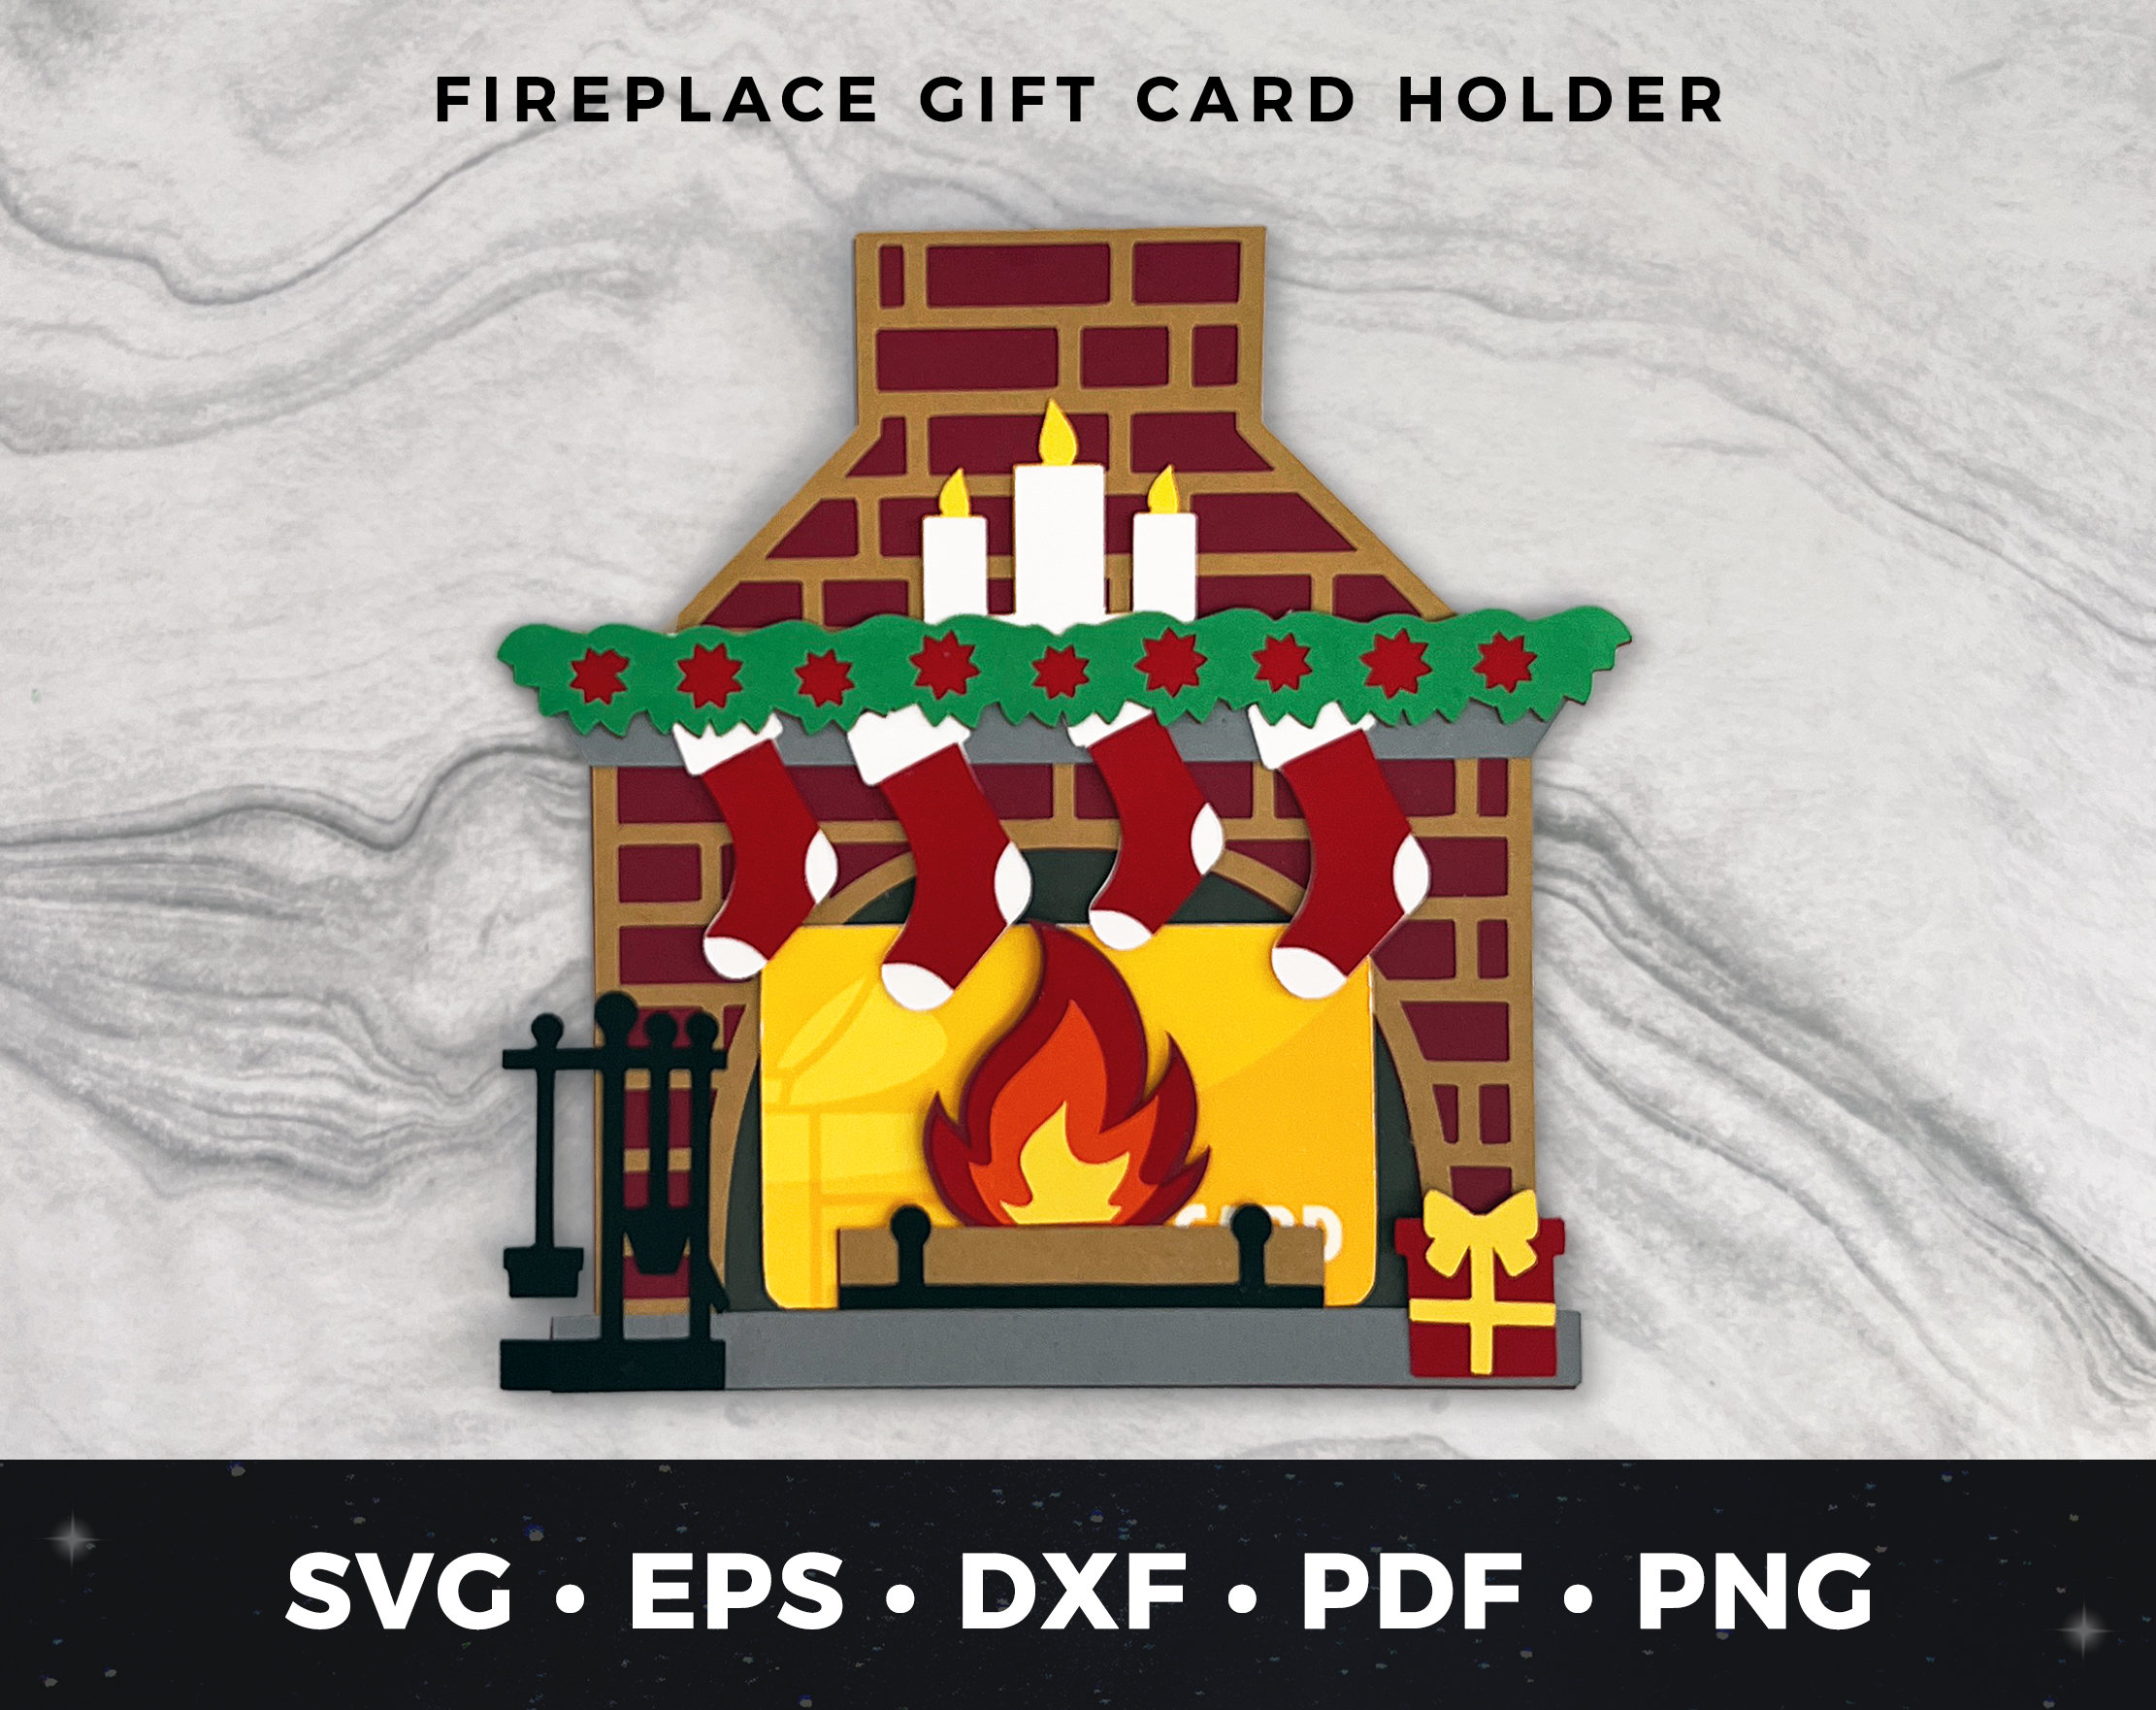 Gift Card Holder SVG, Christmas Fireplace Gift Card Template